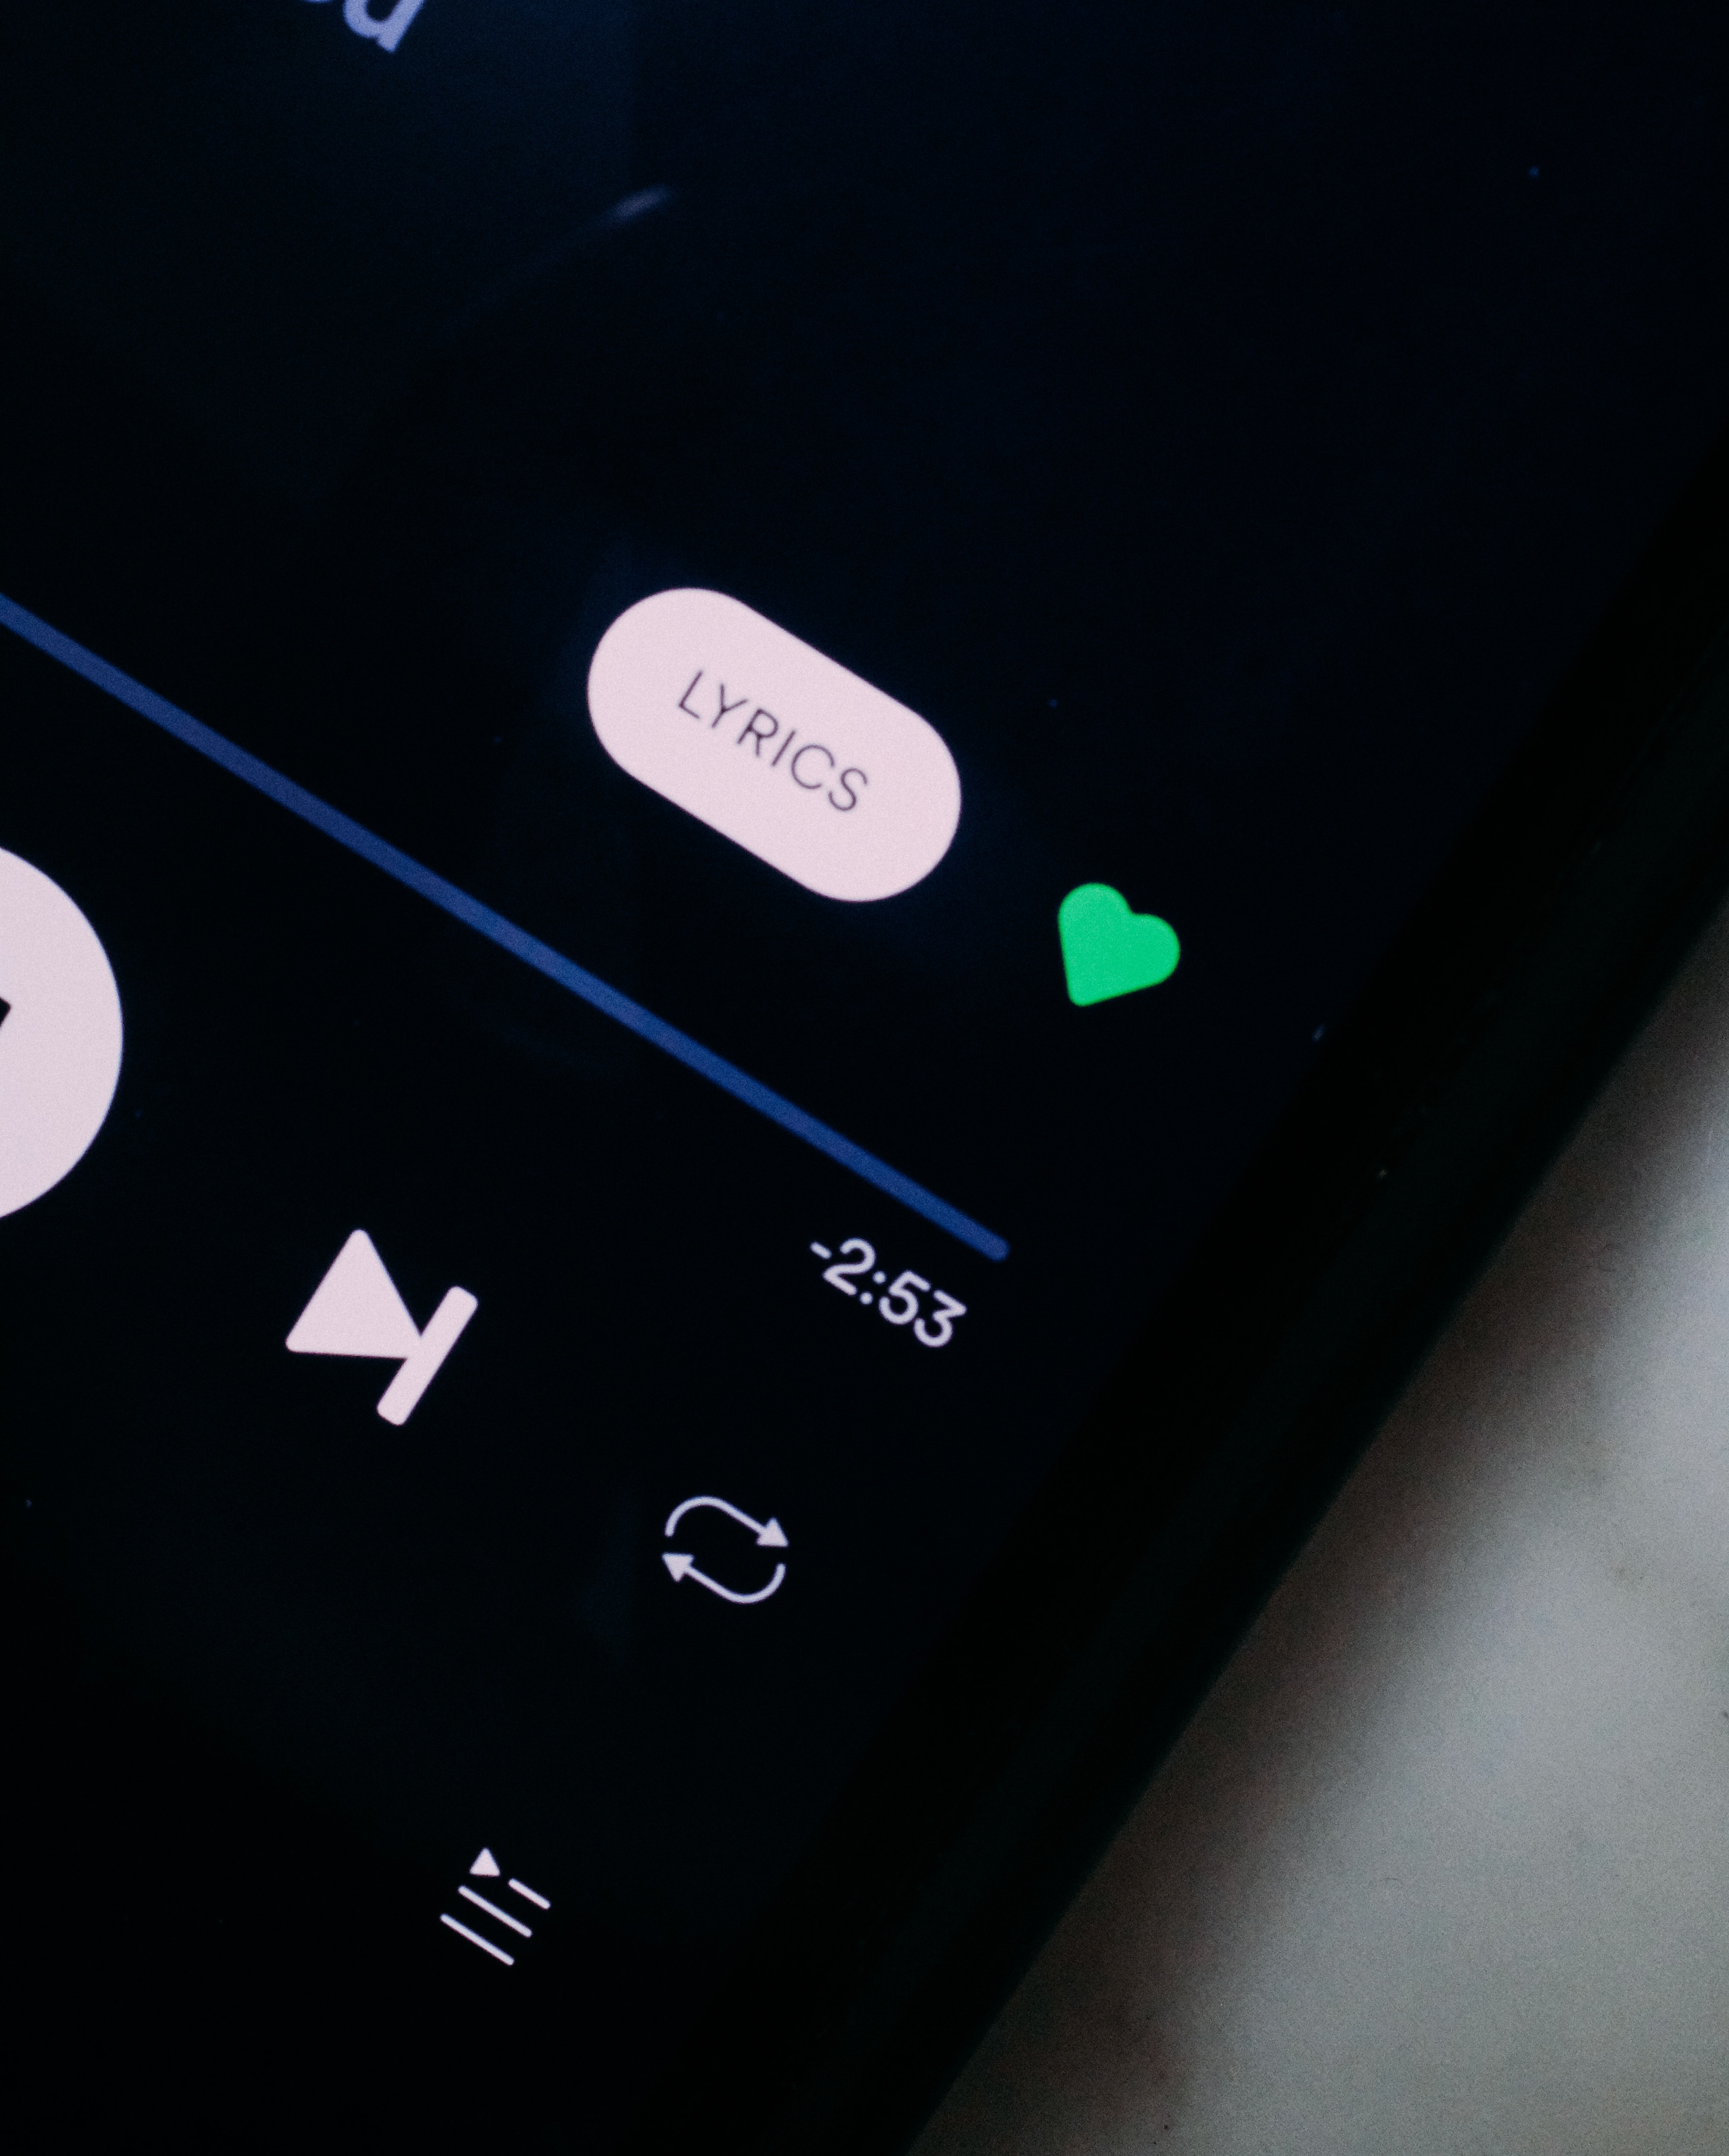 Spotify app on a smartphone screen